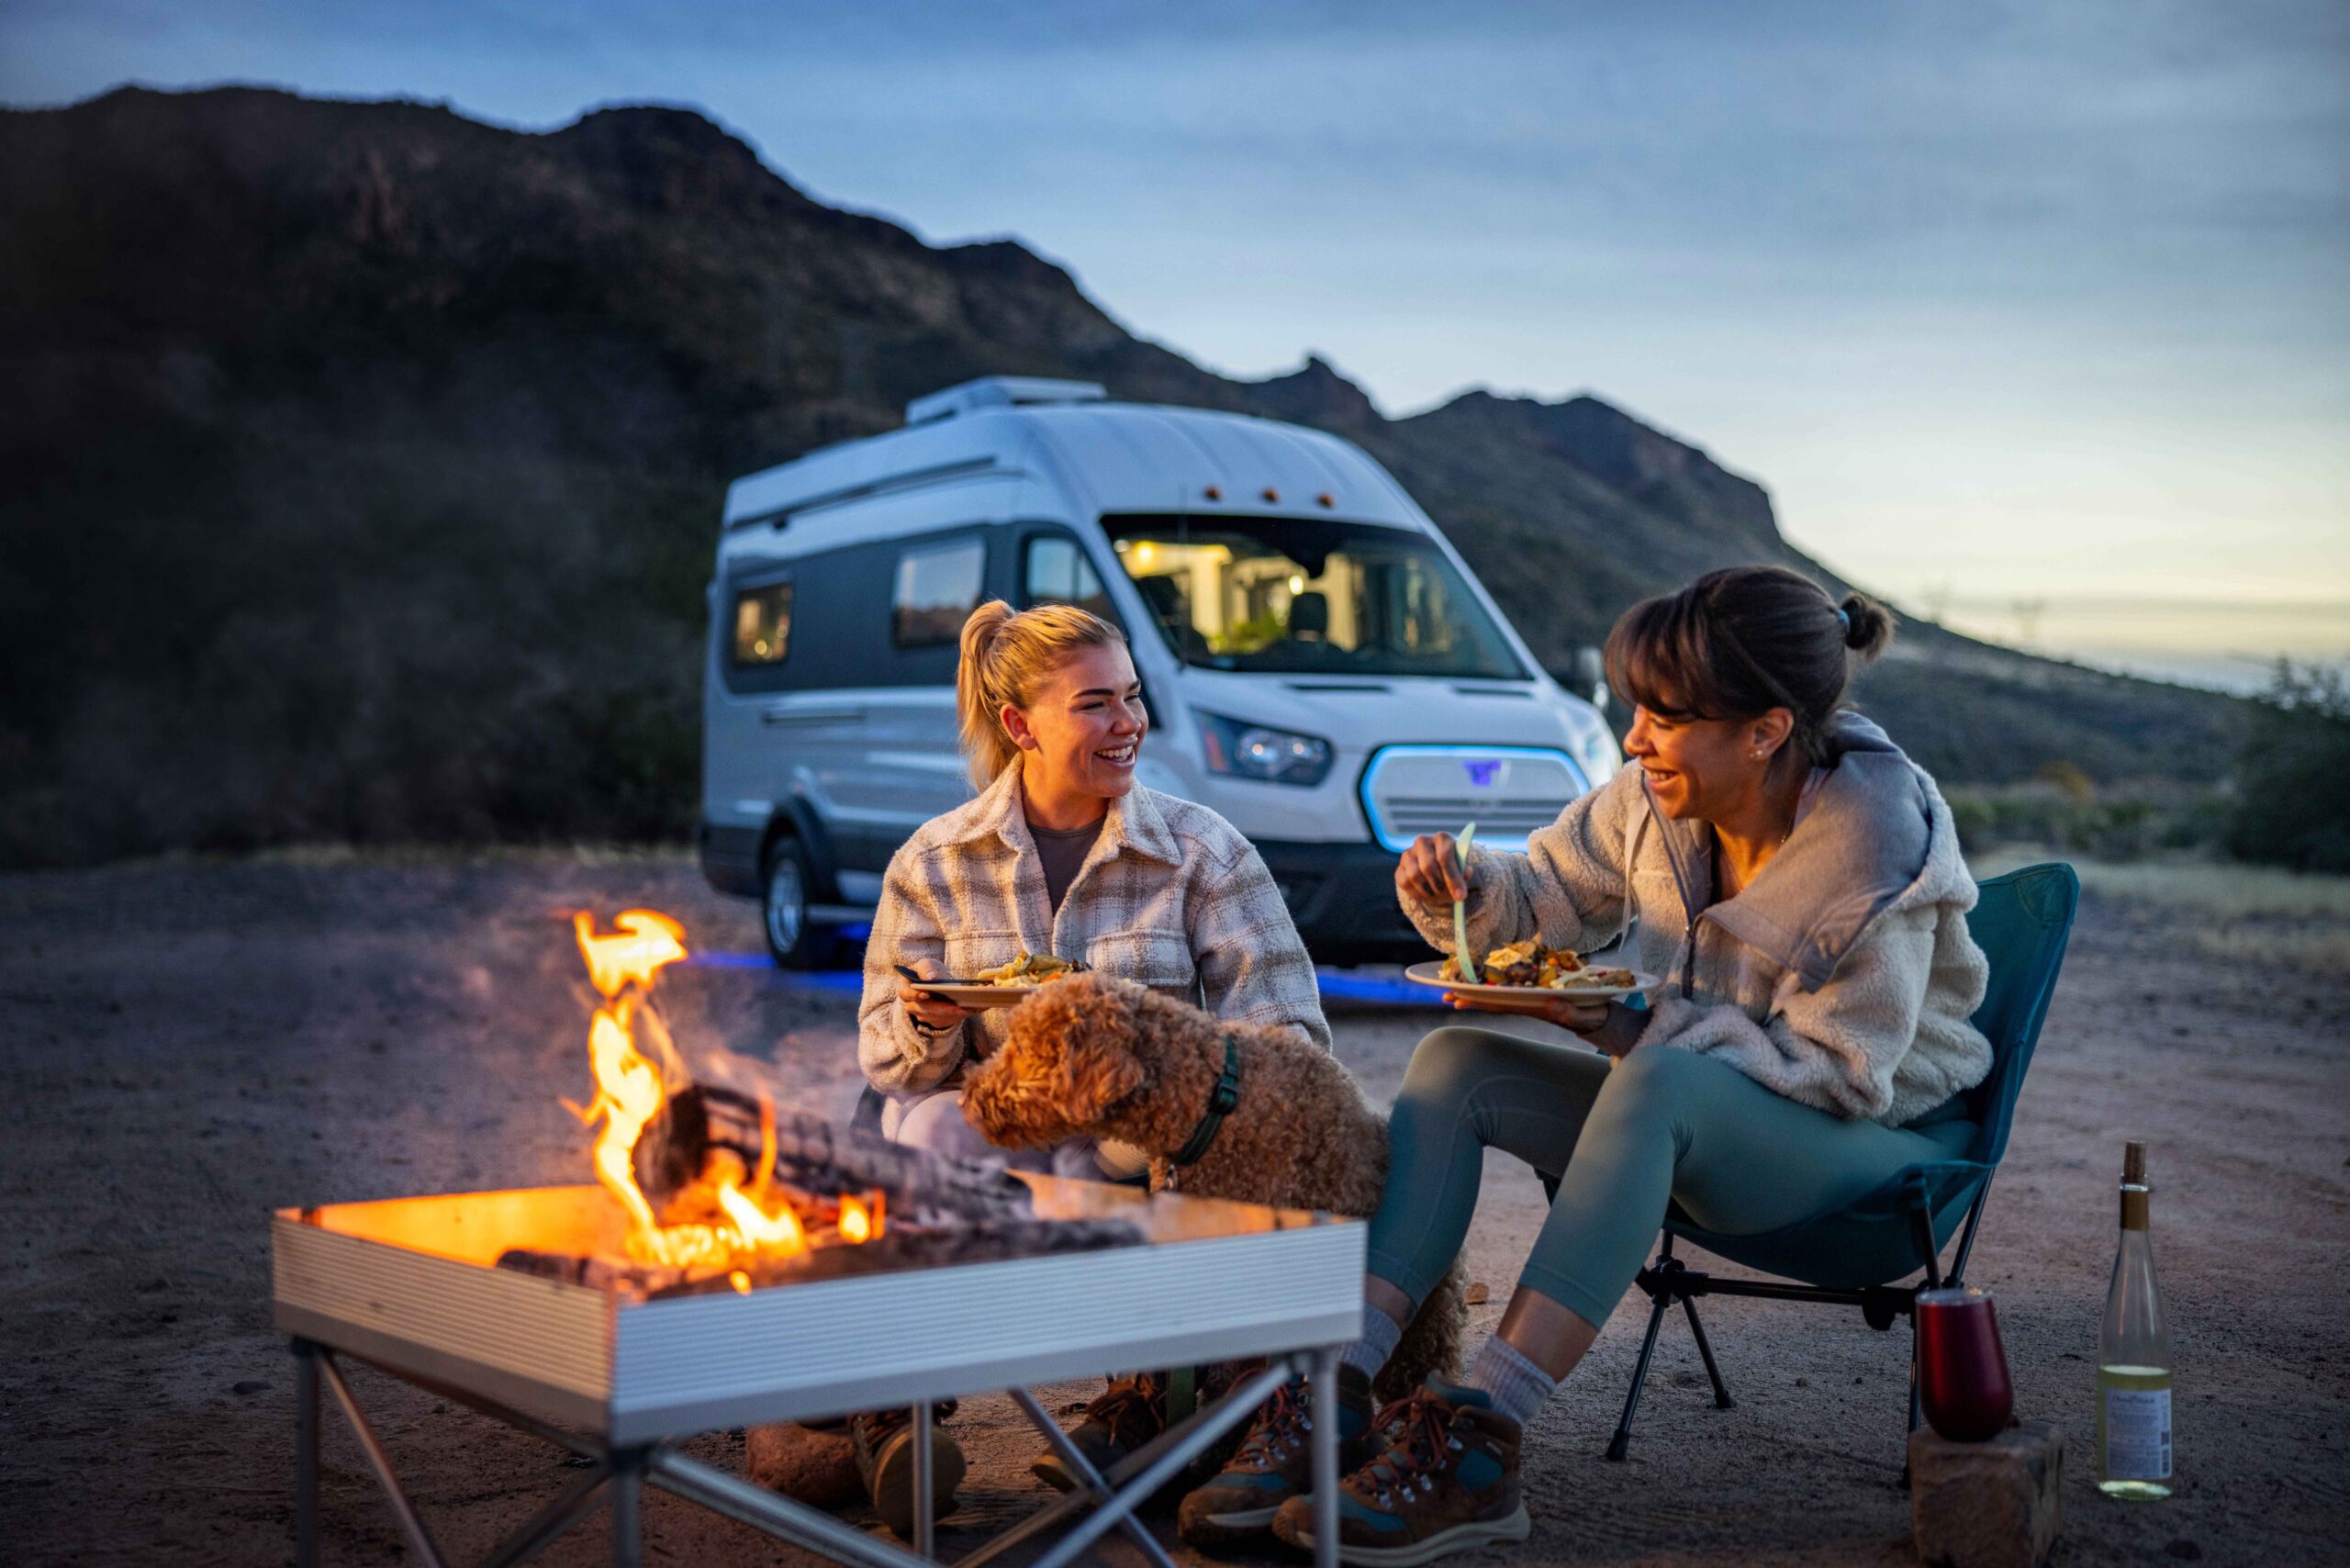 Two women sitting outdoors eating a meal beside their fire pit. A dog is sitting next to them. A Winnebgo e-RV is parked behind them.